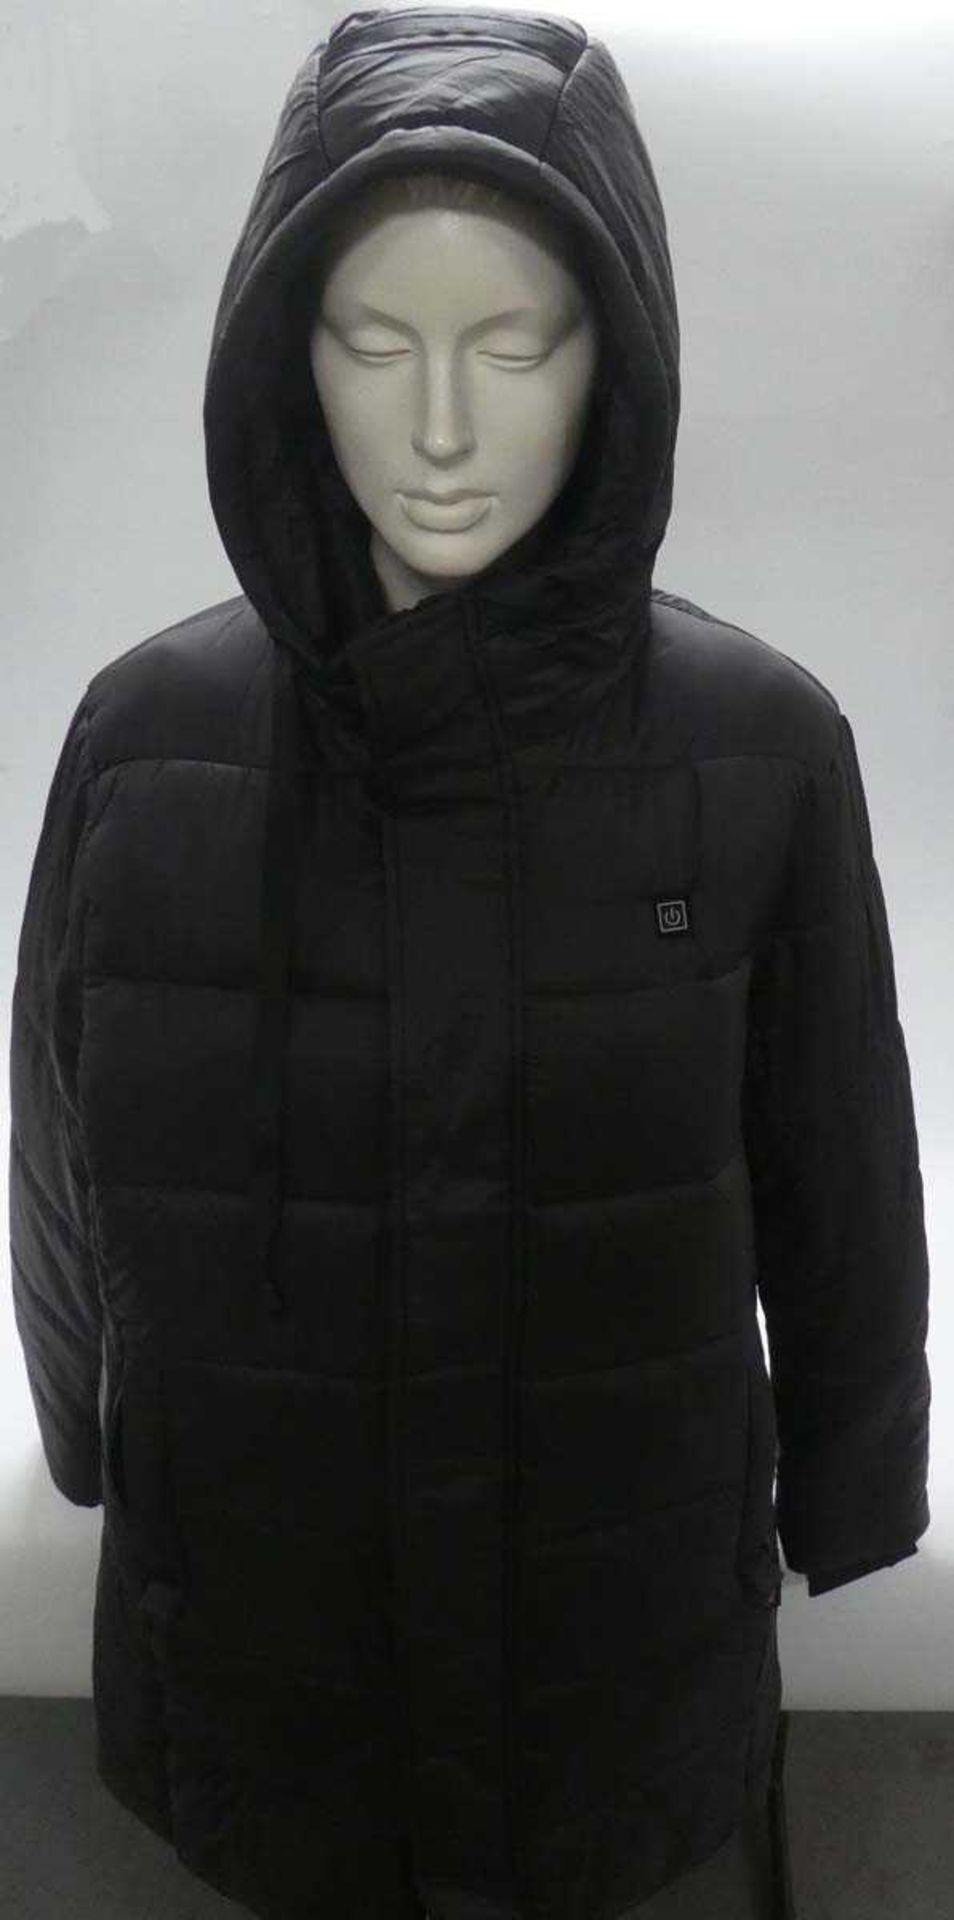 +VAT Thermofusion heated parka with 5000mAh battery pack size medium